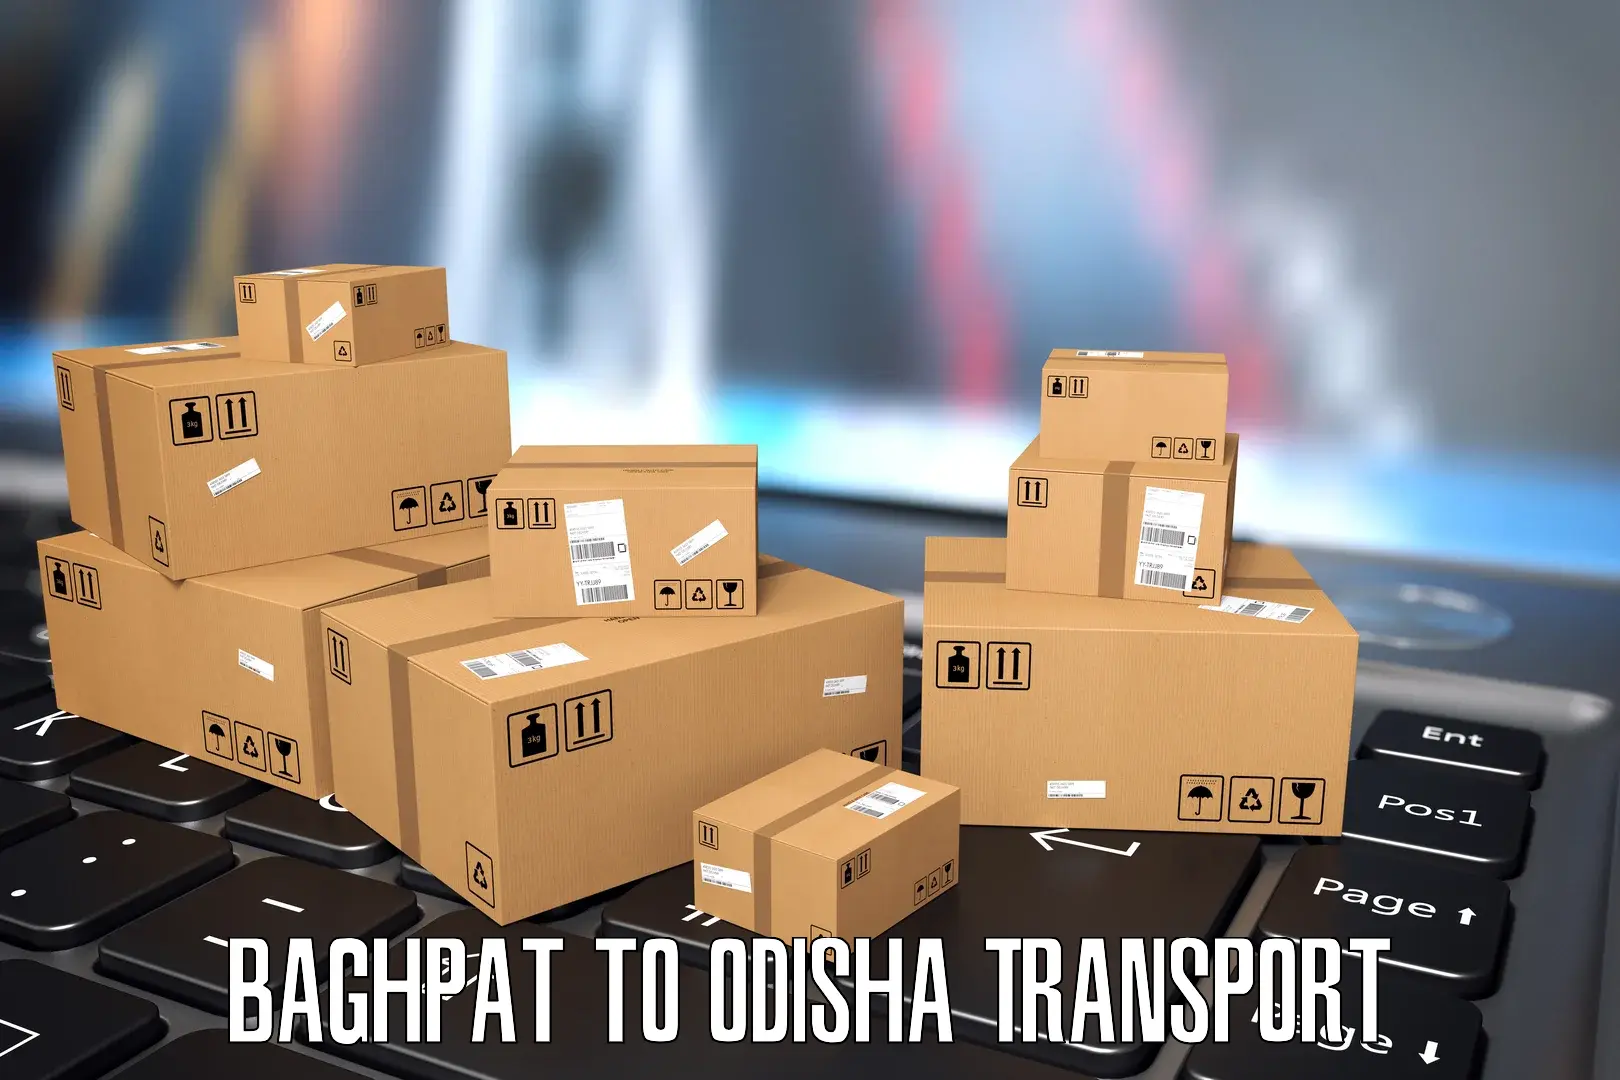 Container transport service Baghpat to Ghuntagadia